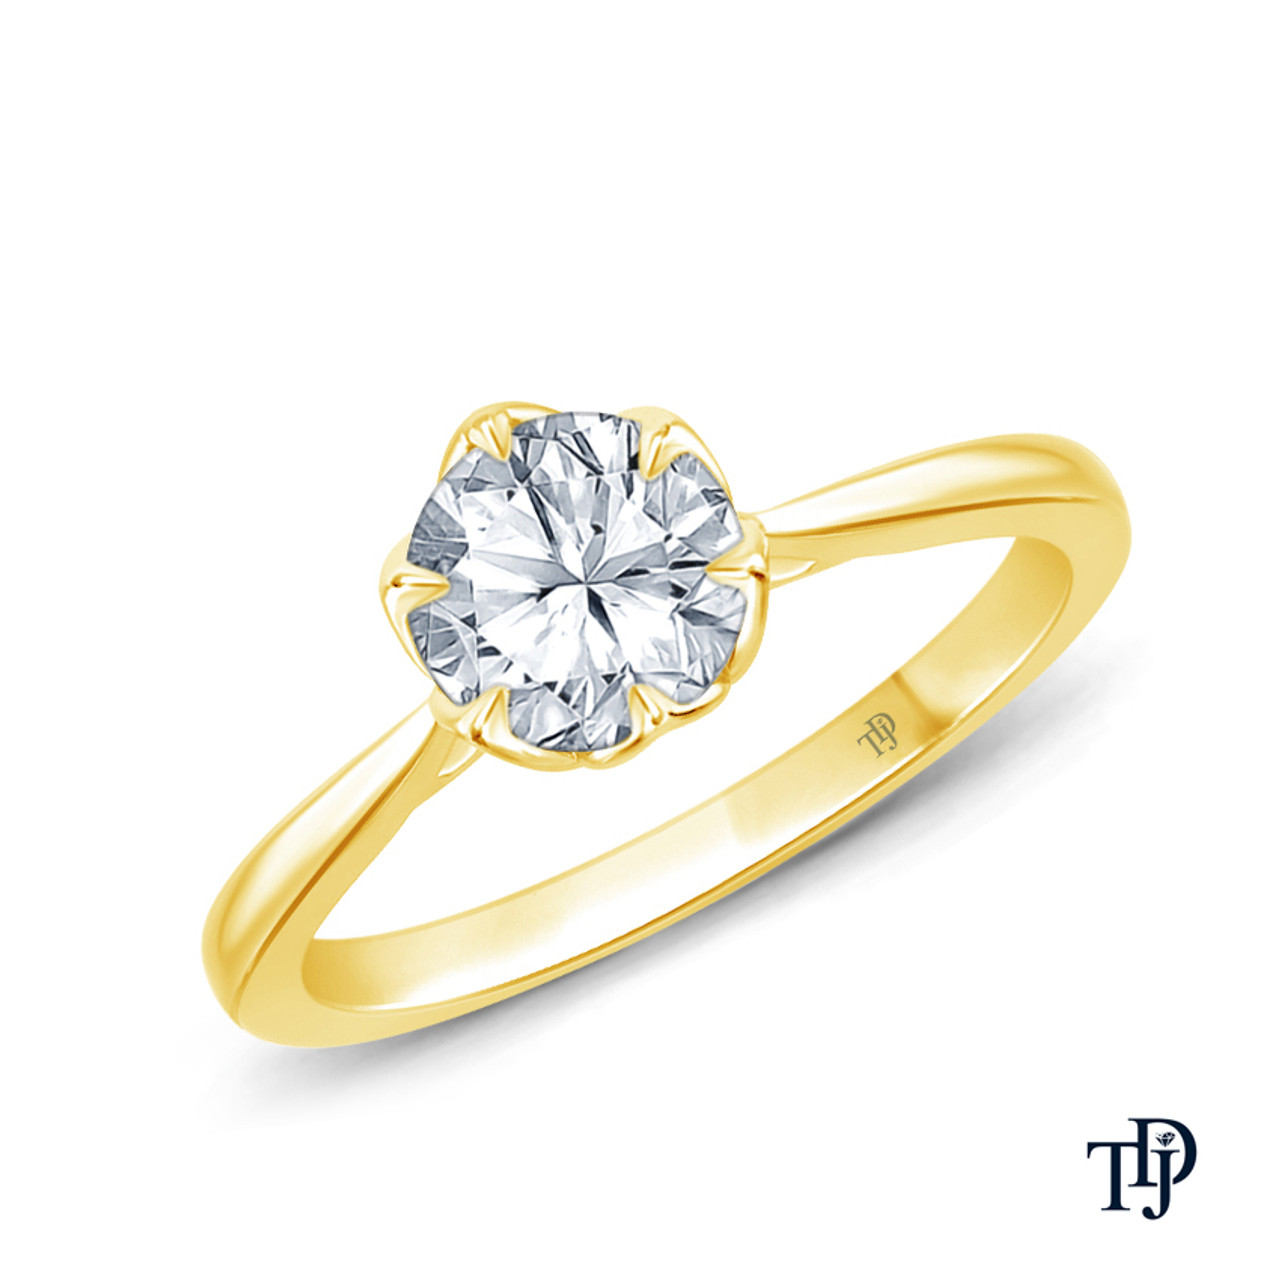 Round Solitaire Diamond Engagement Rings | De Beers US